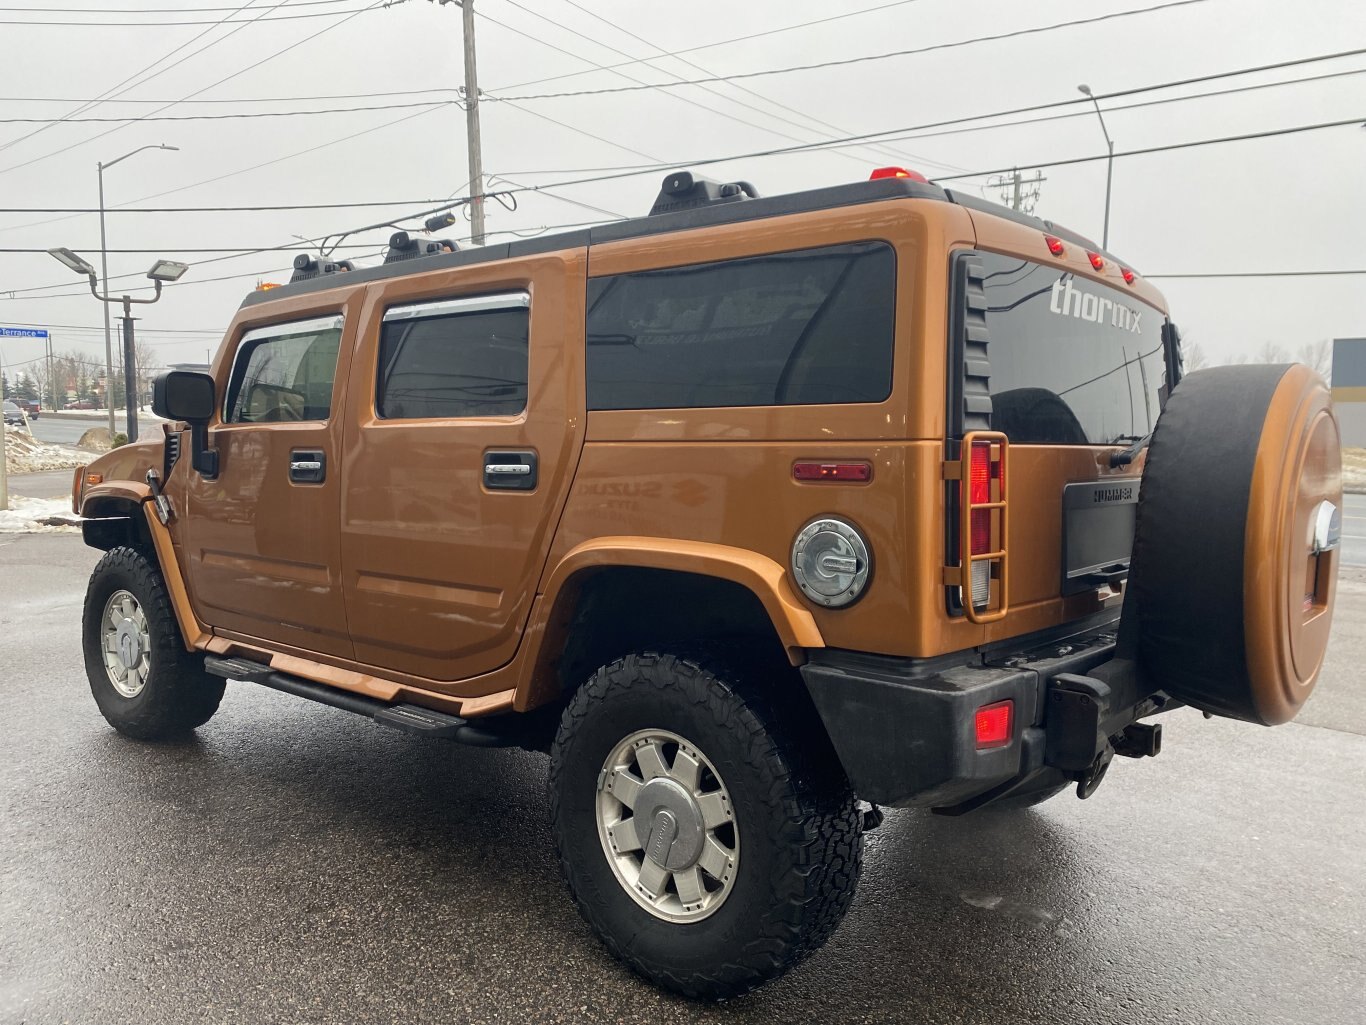 2006 HUMMER H2 AWD WITH SUNROOF, LEATHER SEATS, HEATED SEATS, DVD PLAYER, REMOTE START & REAR VIEW CAMERA!!